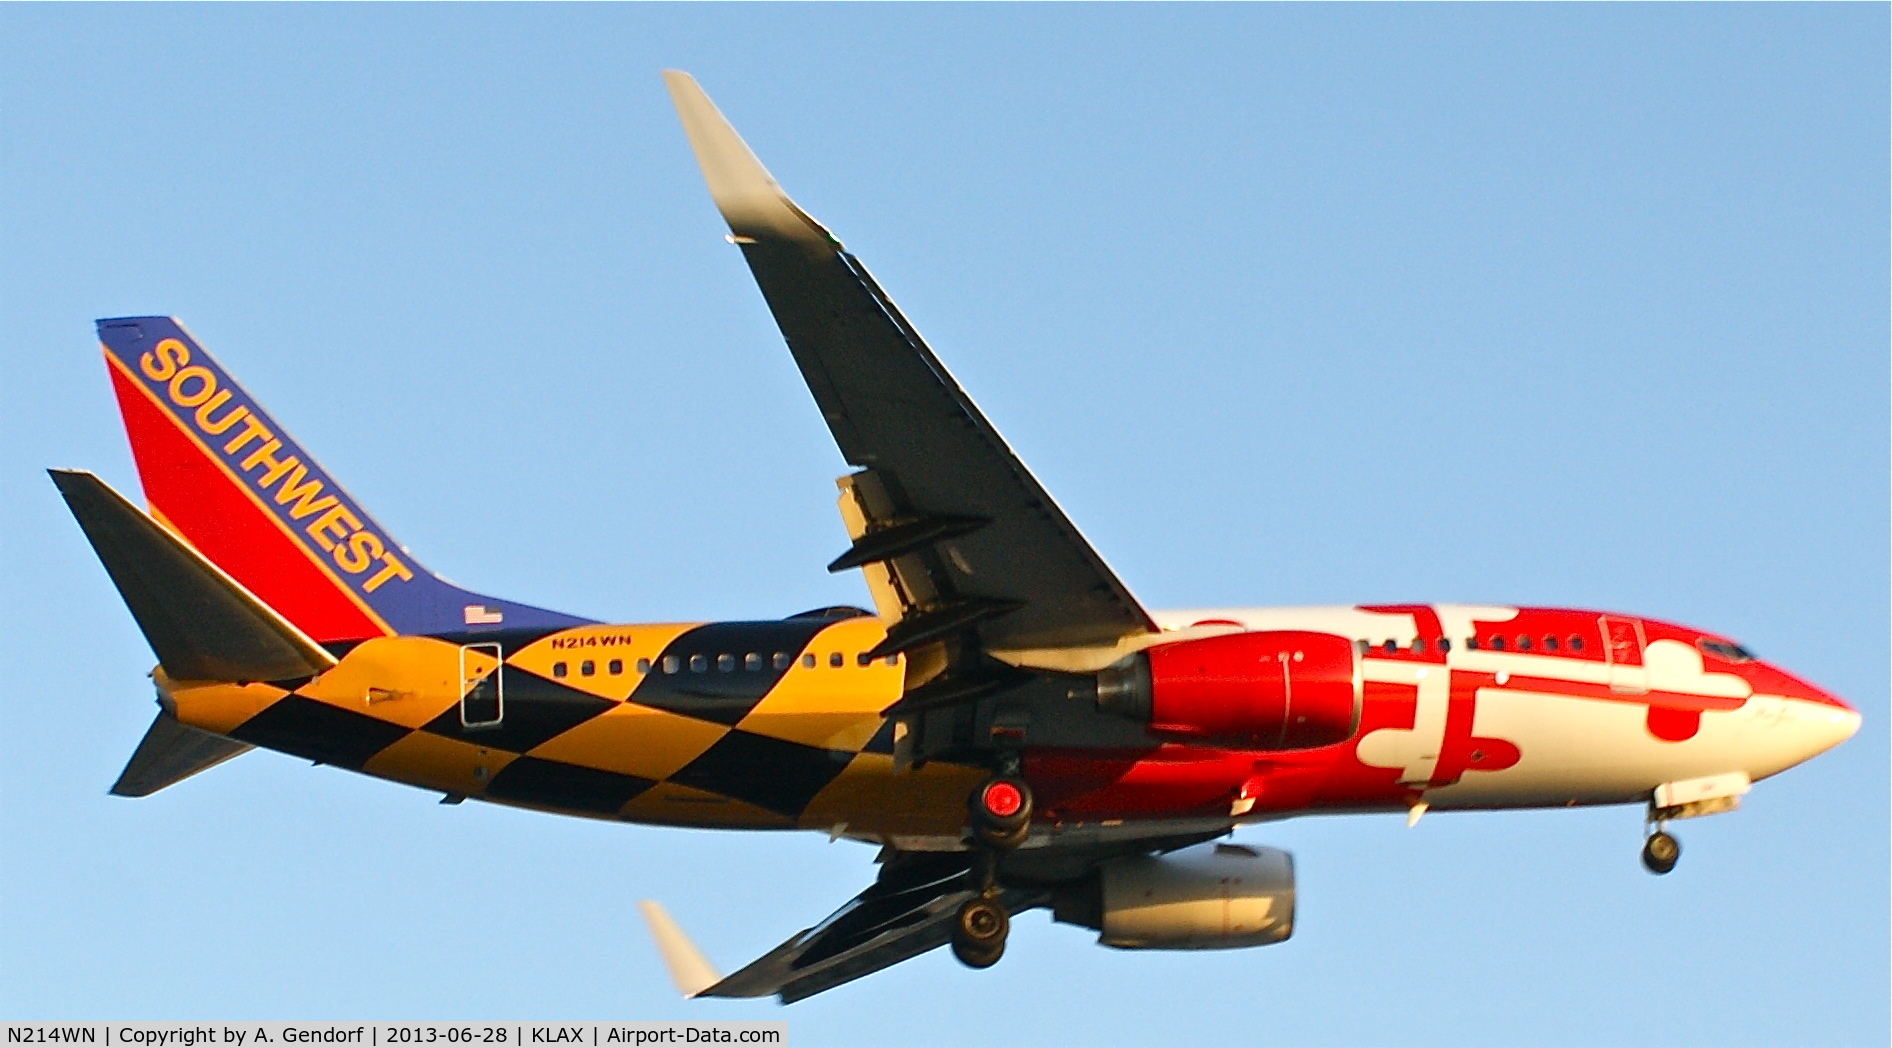 N214WN, 2005 Boeing 737-7H4 C/N 32486, Southwest Airlines, is aproaching Los Angeles Int´l(KLAX), in the soft evening light